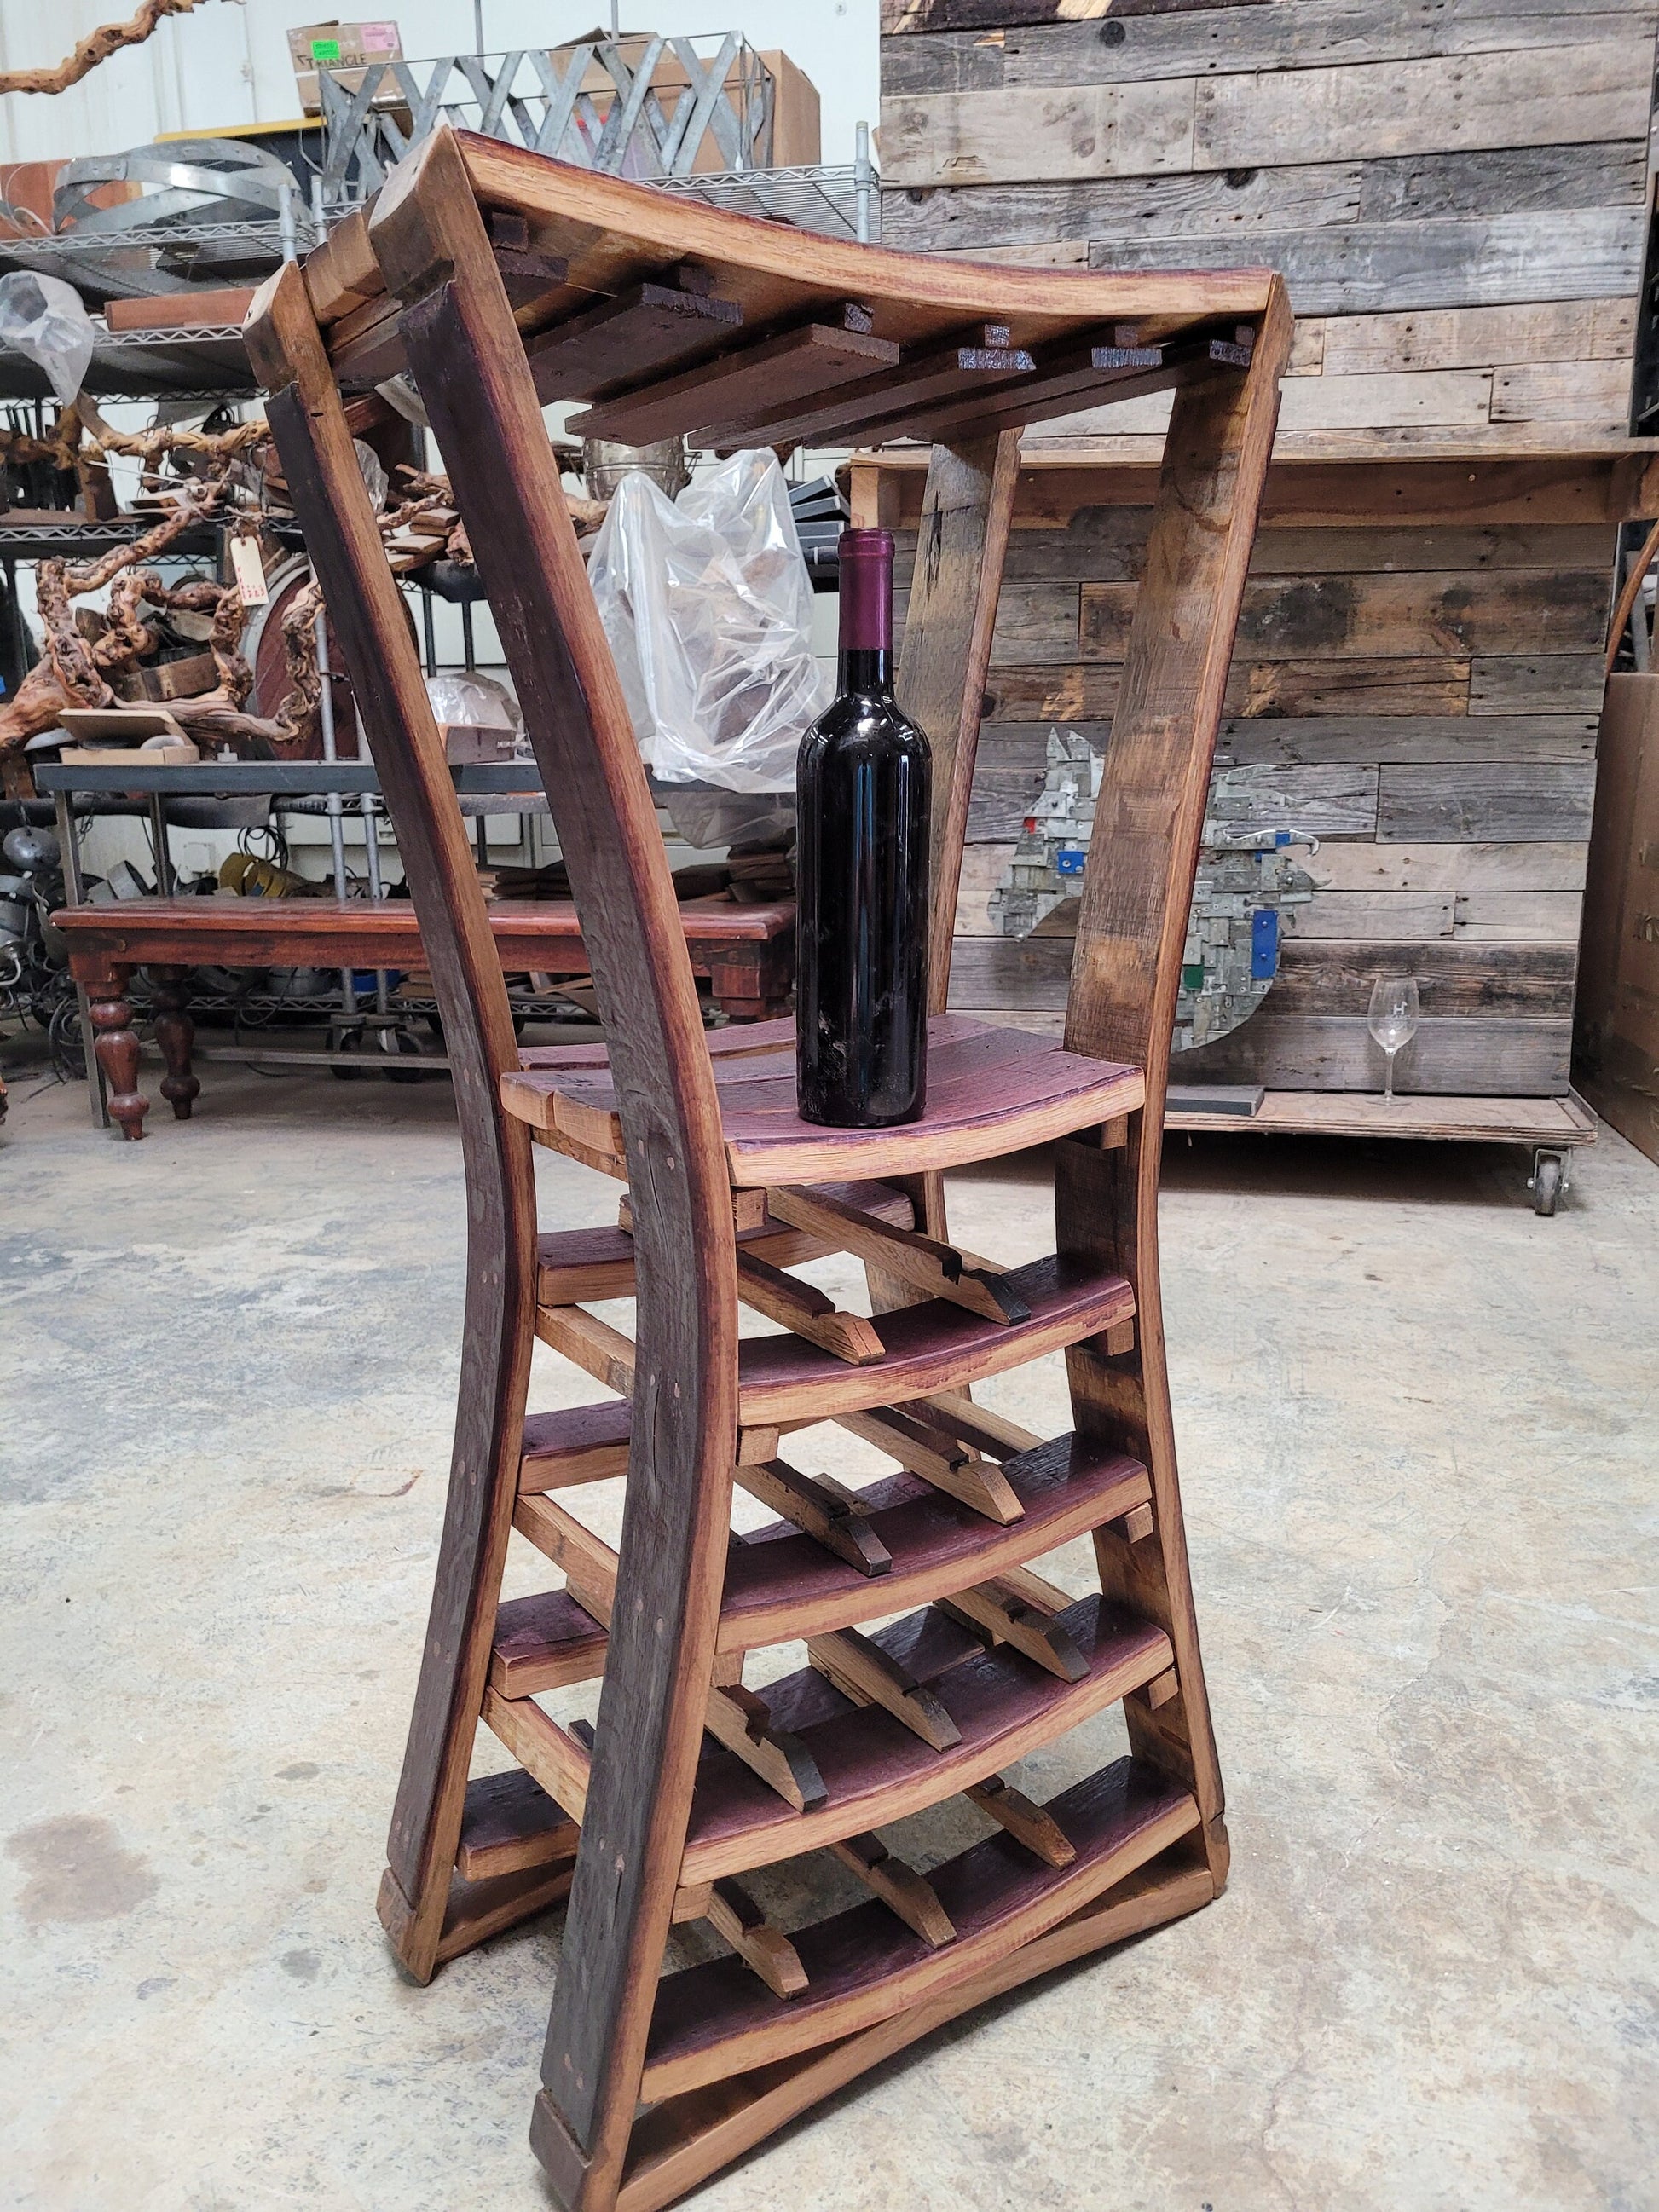 Large Narrow Wine and Glass Rack - Estrecho - Made from retired California wine barrels. 100% Recycled!